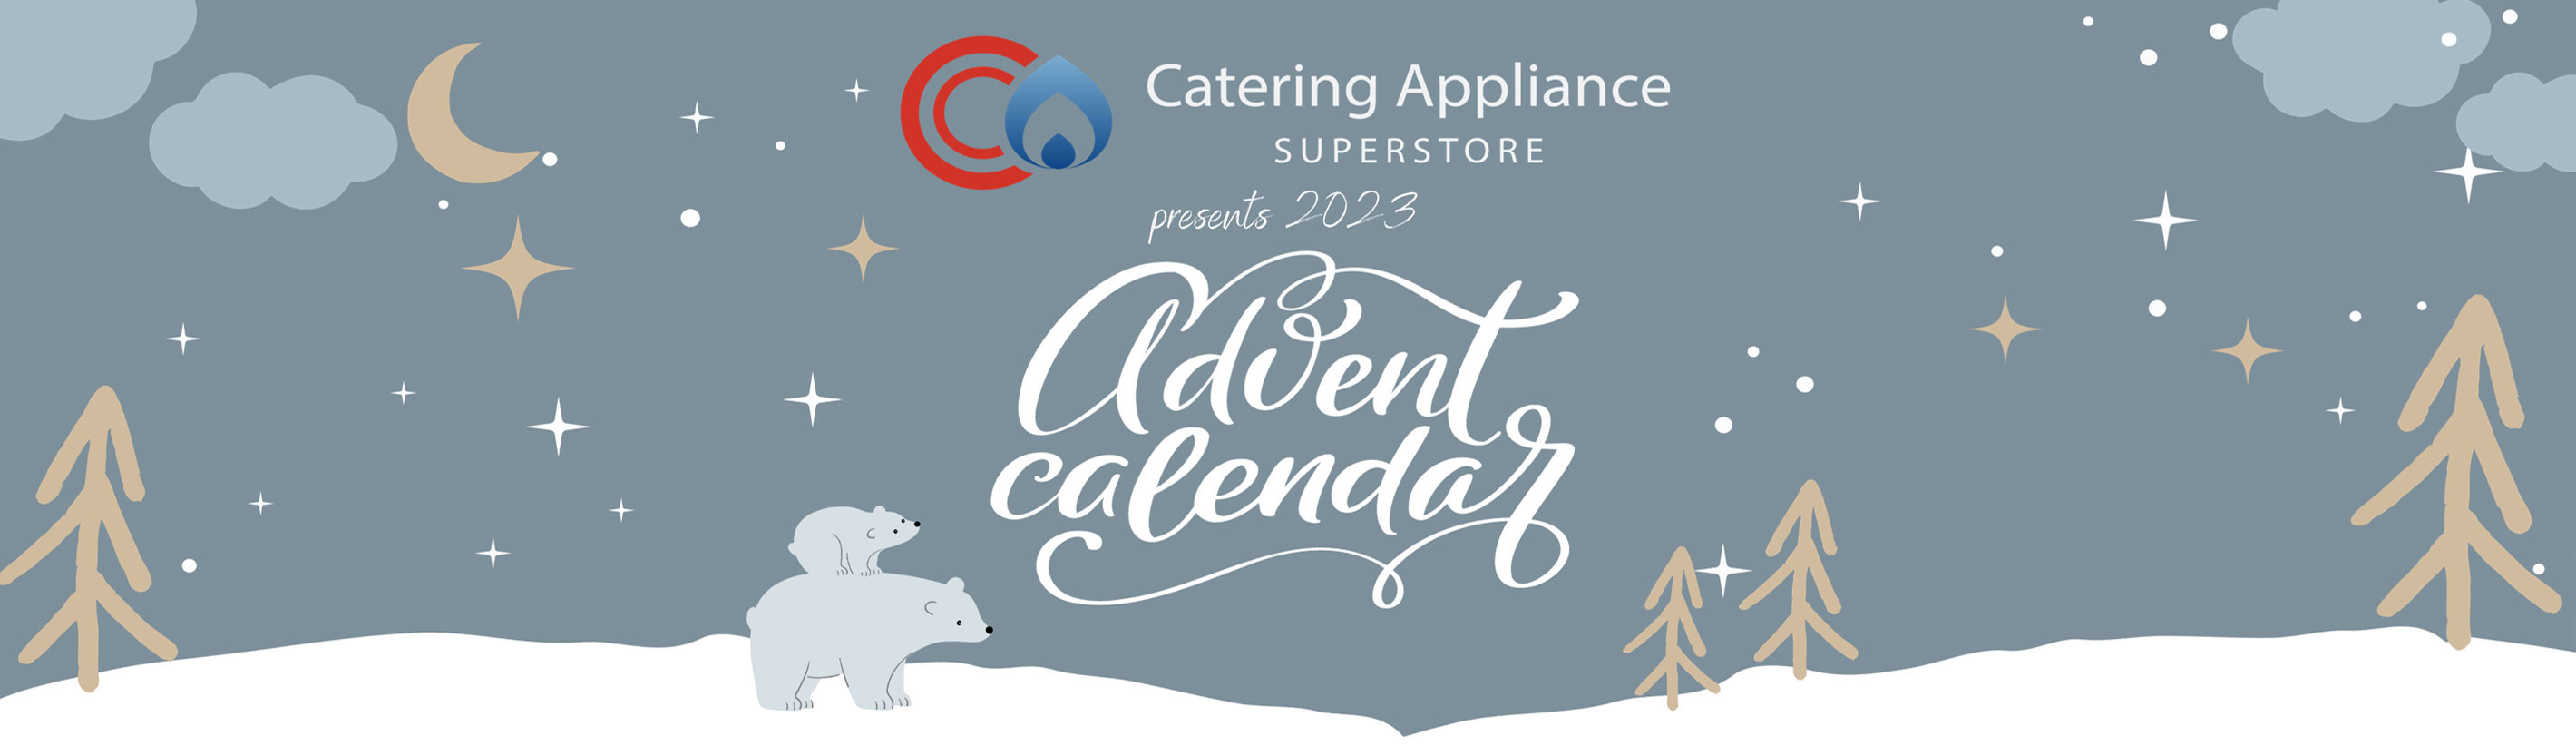 Catering Appliance Superstore presents Advent Calender 2023